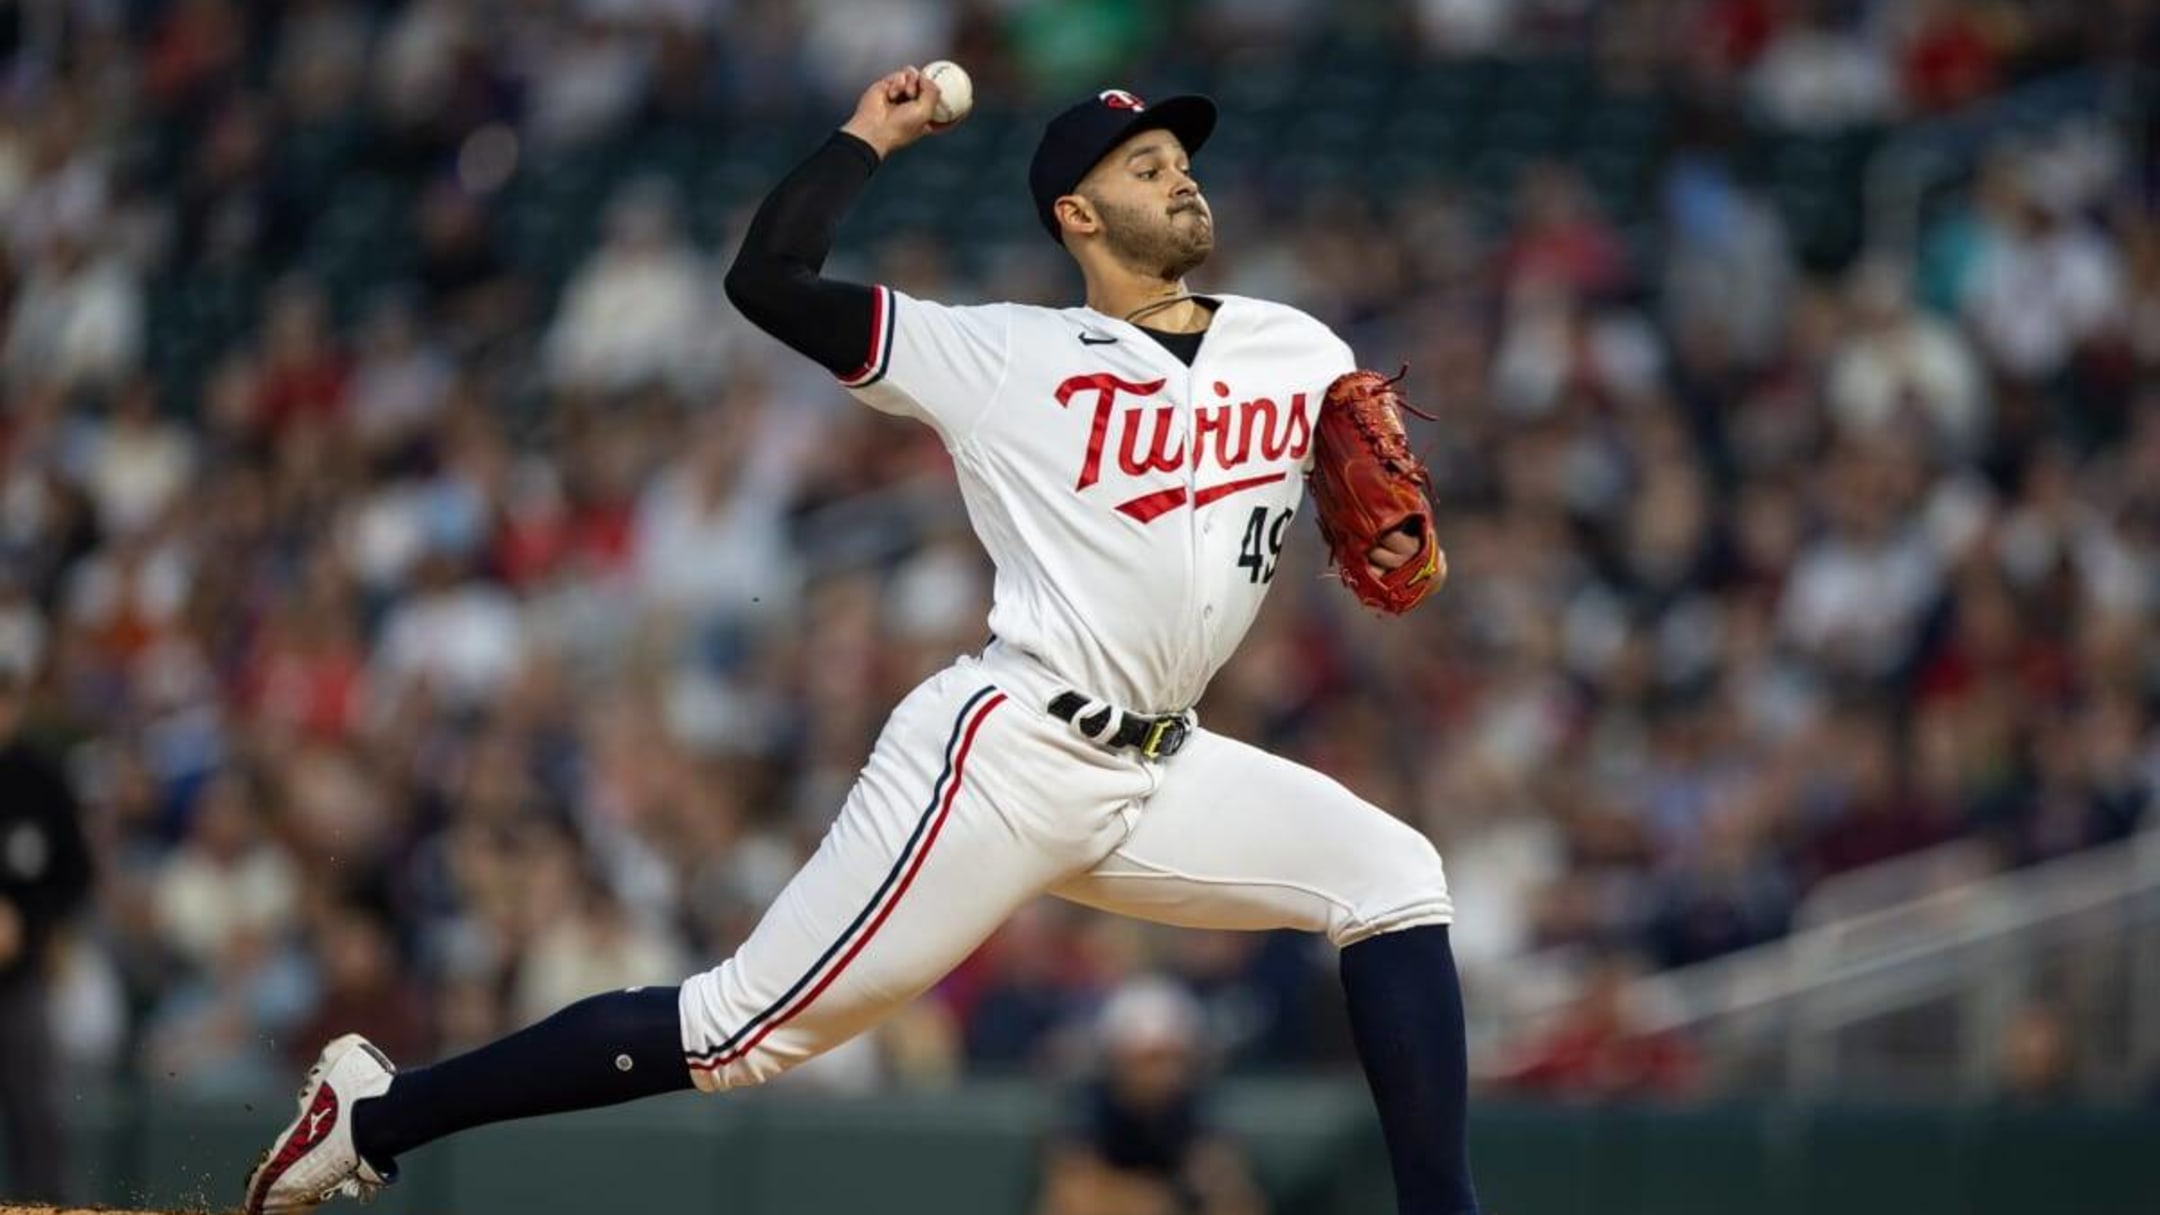 Joe Ryan makes bid for playoff start in Twins' 9-3 win over Angels